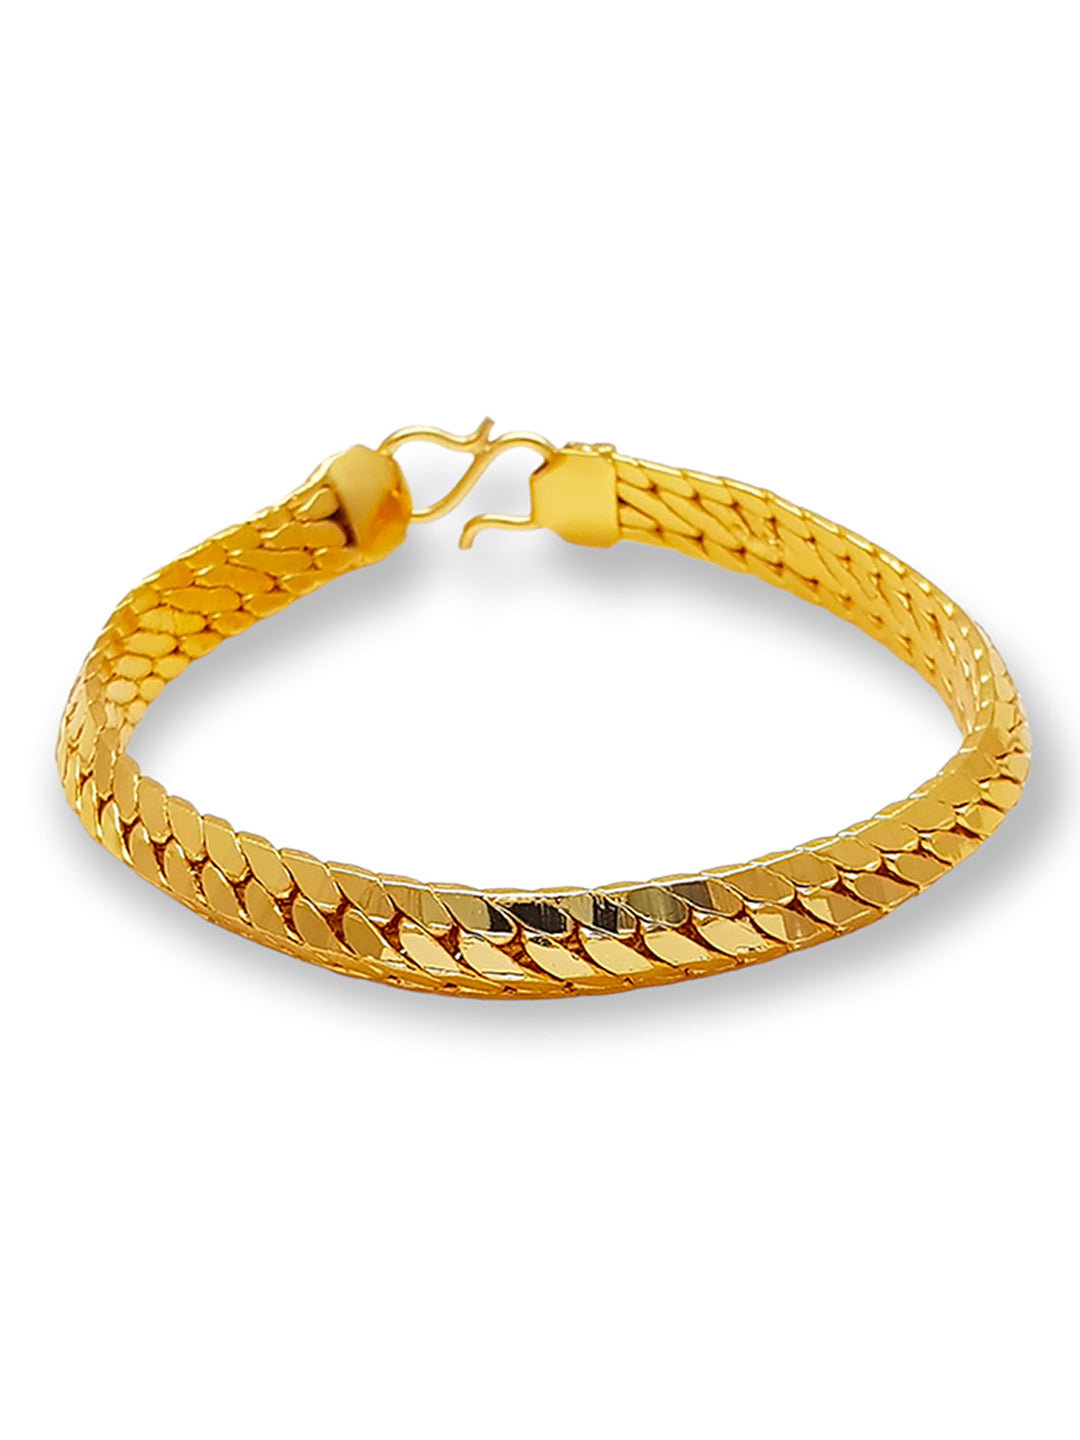 Amazon.com: Galis Gold Rope Chain Bracelets for Women and Men - Unisex  Premium Stainless Steel Bracelet for Men and Women, Gold Plated Non Tarnish  Bracelet, One Wrap Wheat Chain Style with Lobster